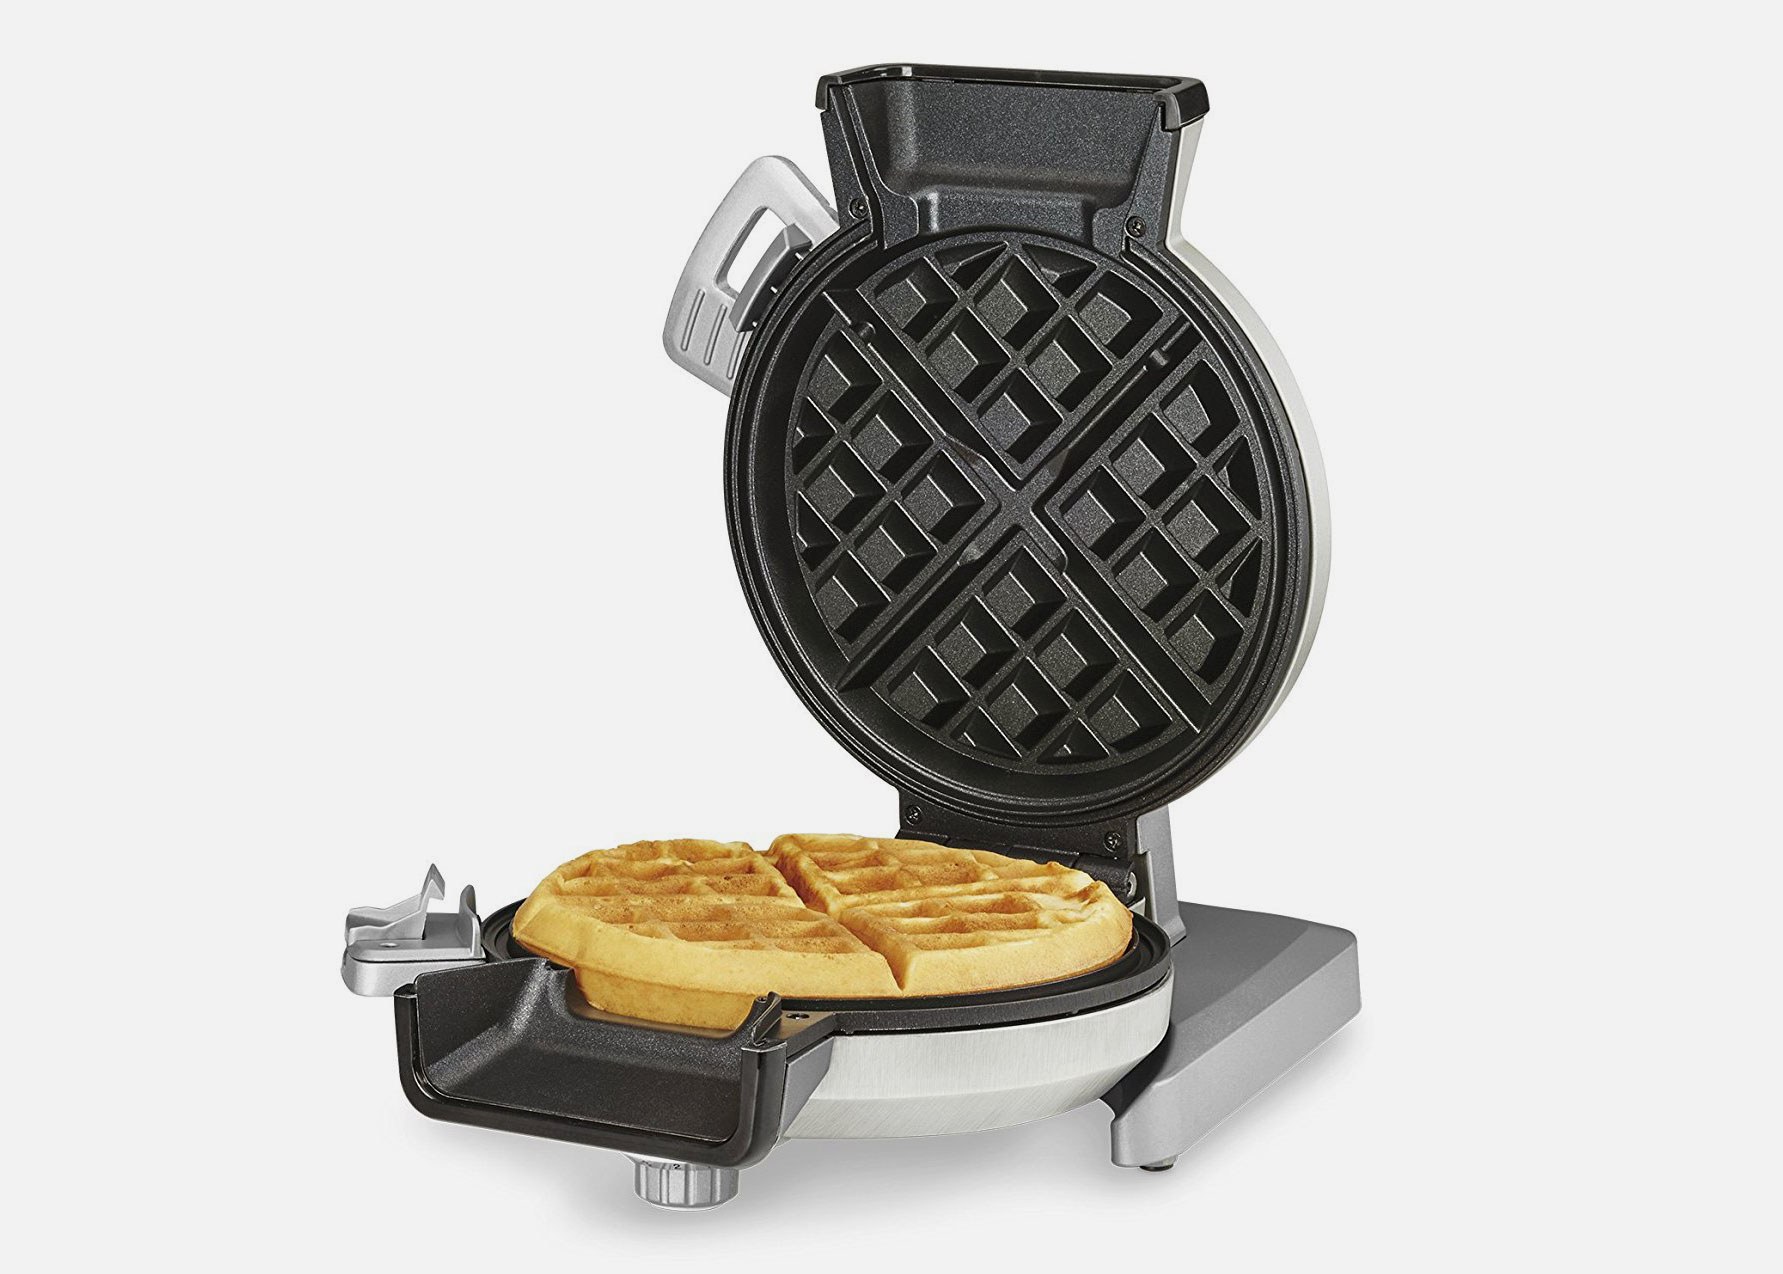 Best way to clean a Belgian waffle iron?